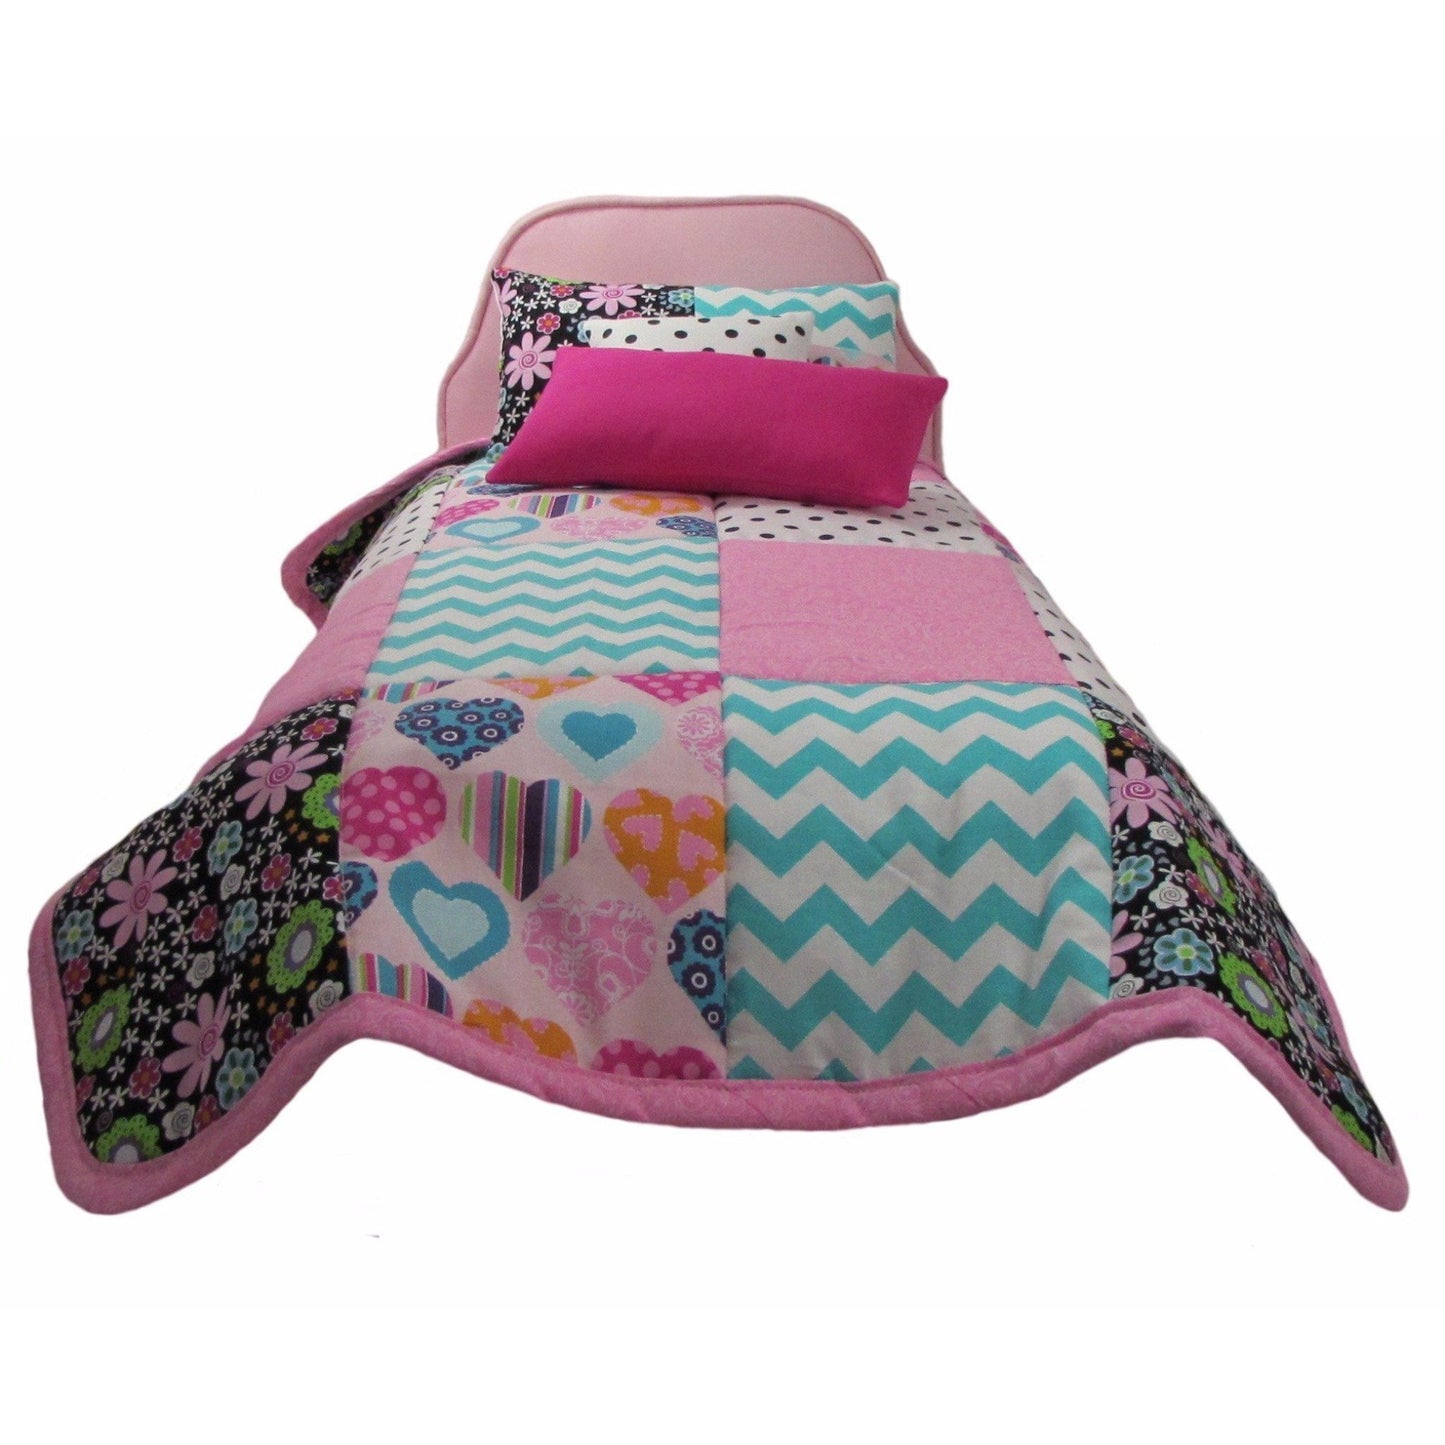 Floral, Dots, and Chevron Doll Quilt and Upholstered Pink Doll Bed for 18-inch dolls Second view